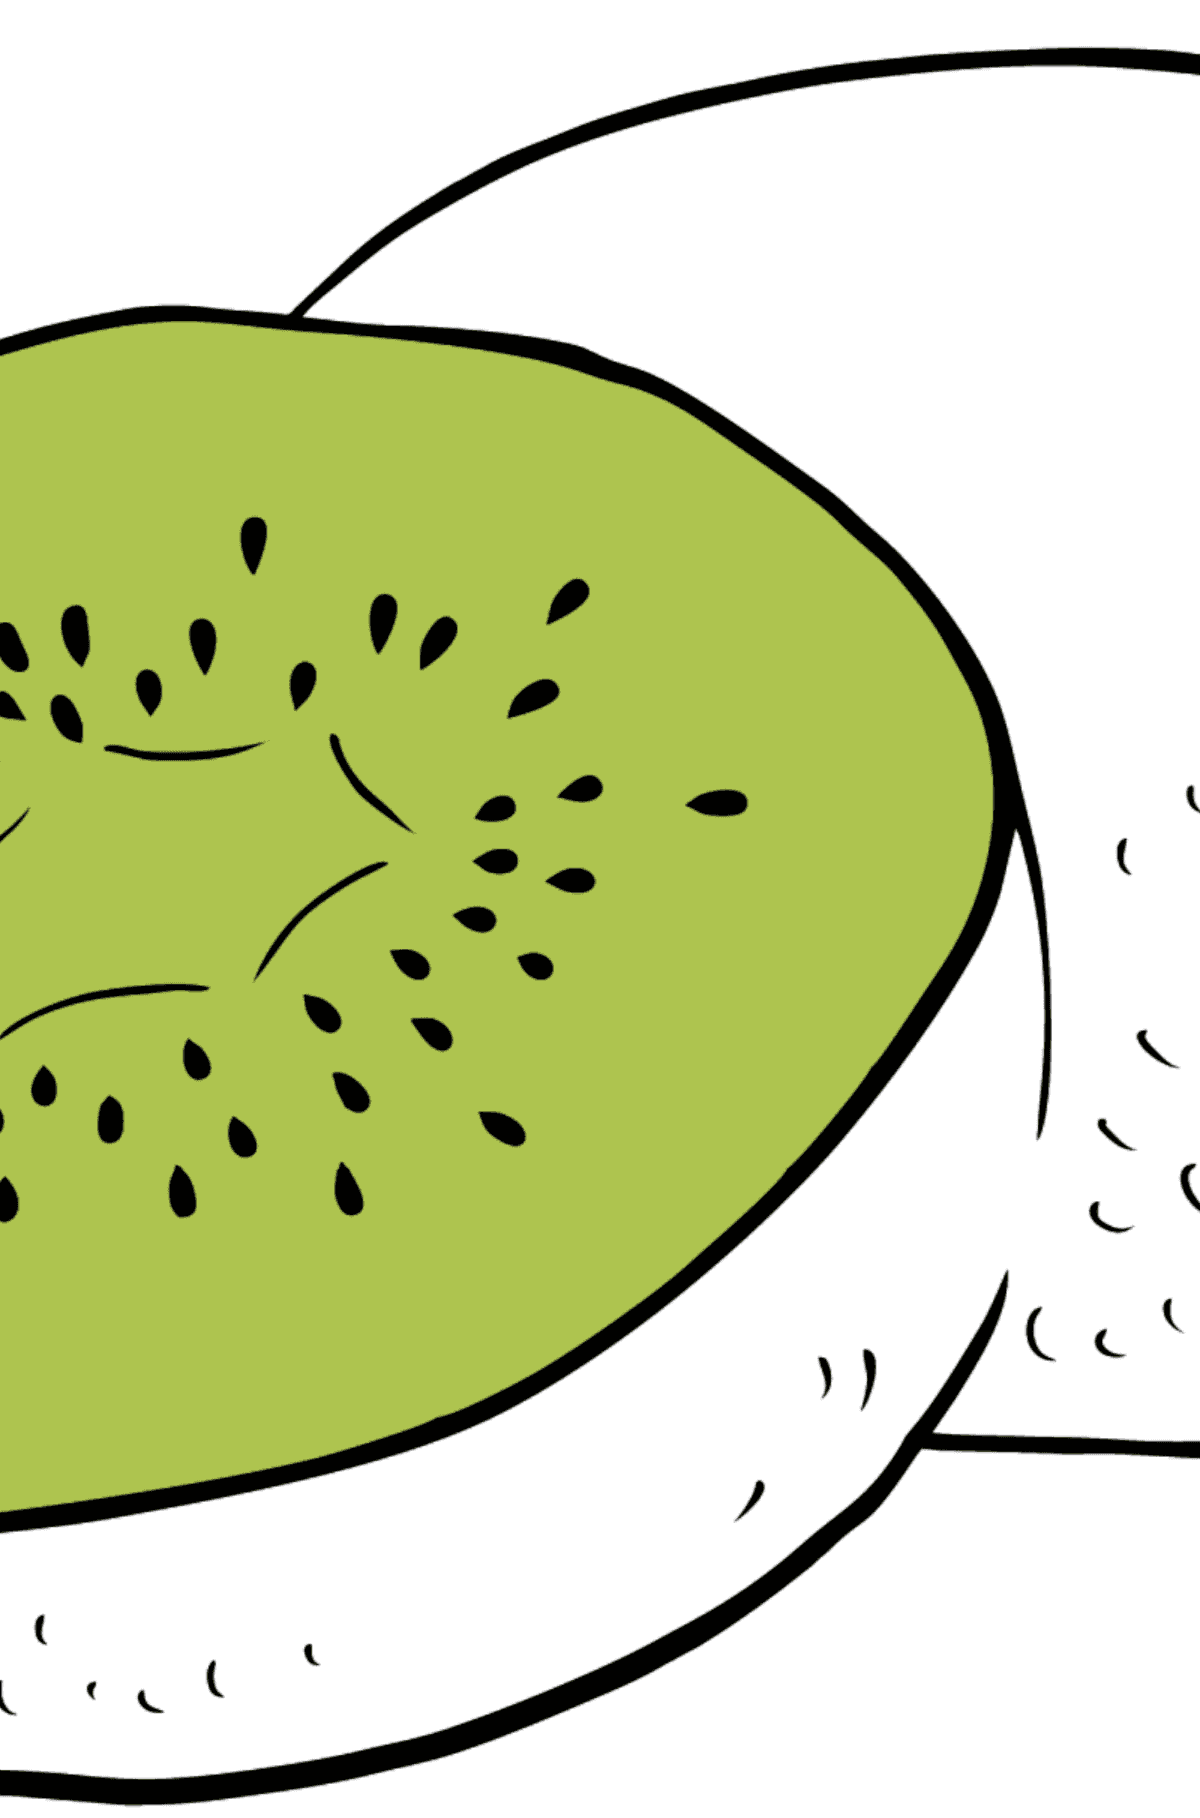 Kiwi coloring page - Coloring by Letters for Kids